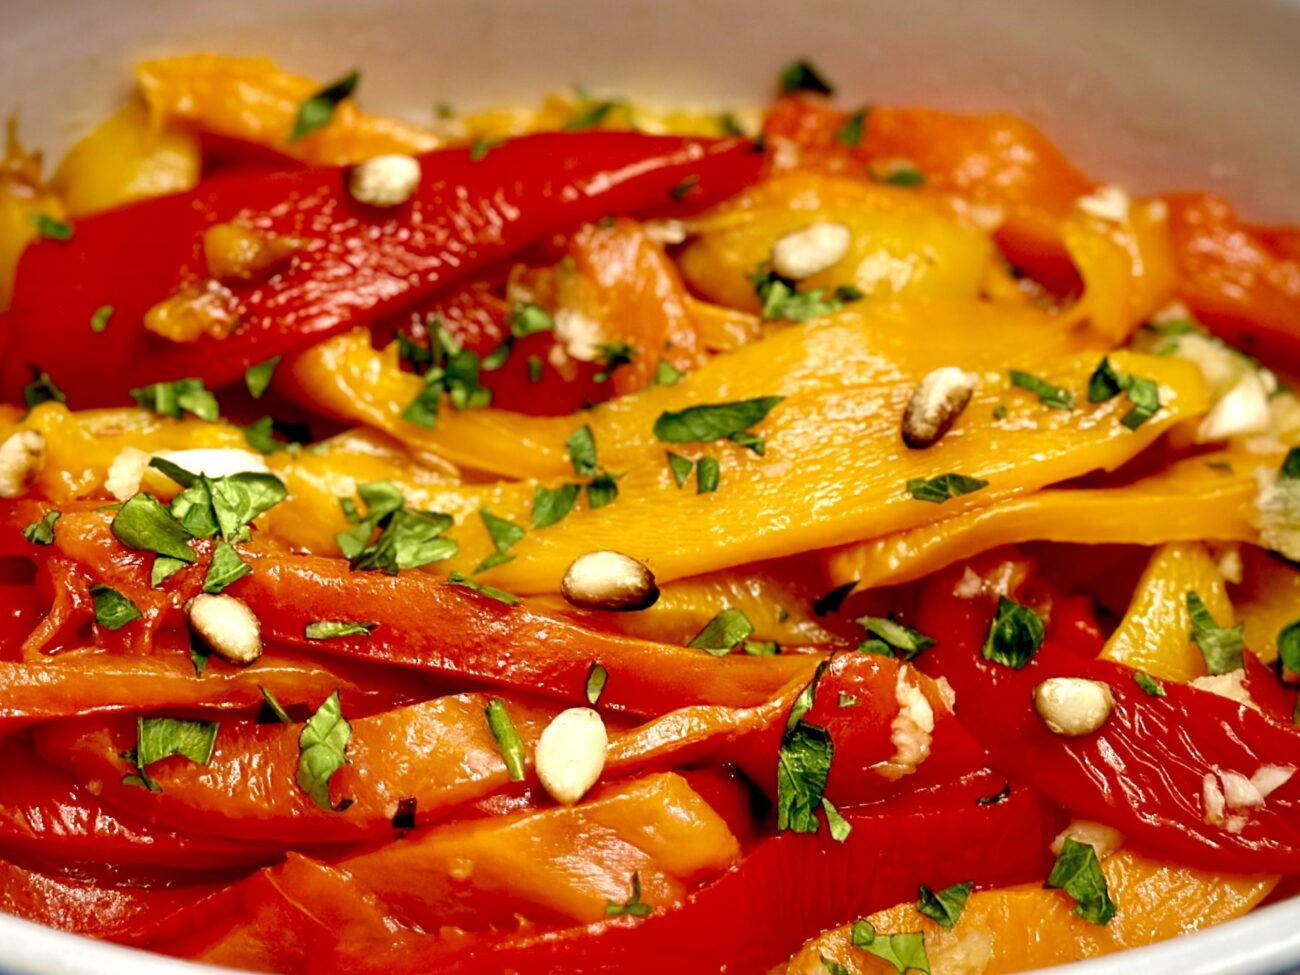 Warm Roasted Bell Pepper Salad with Pine Nuts